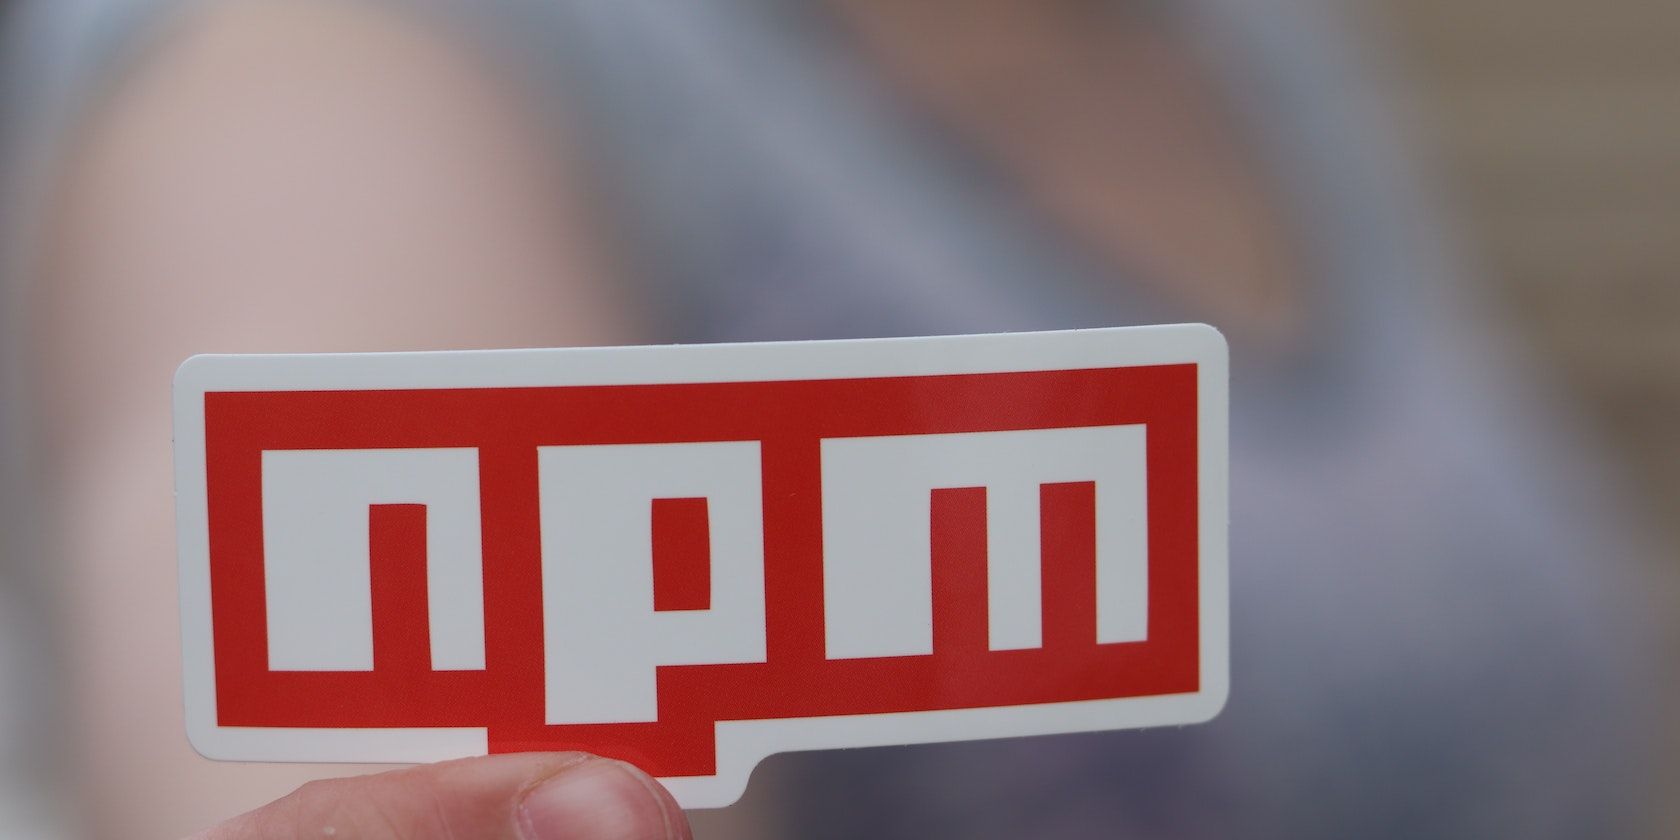 How To Run, Configure, And Troubleshoot Npm Scripts